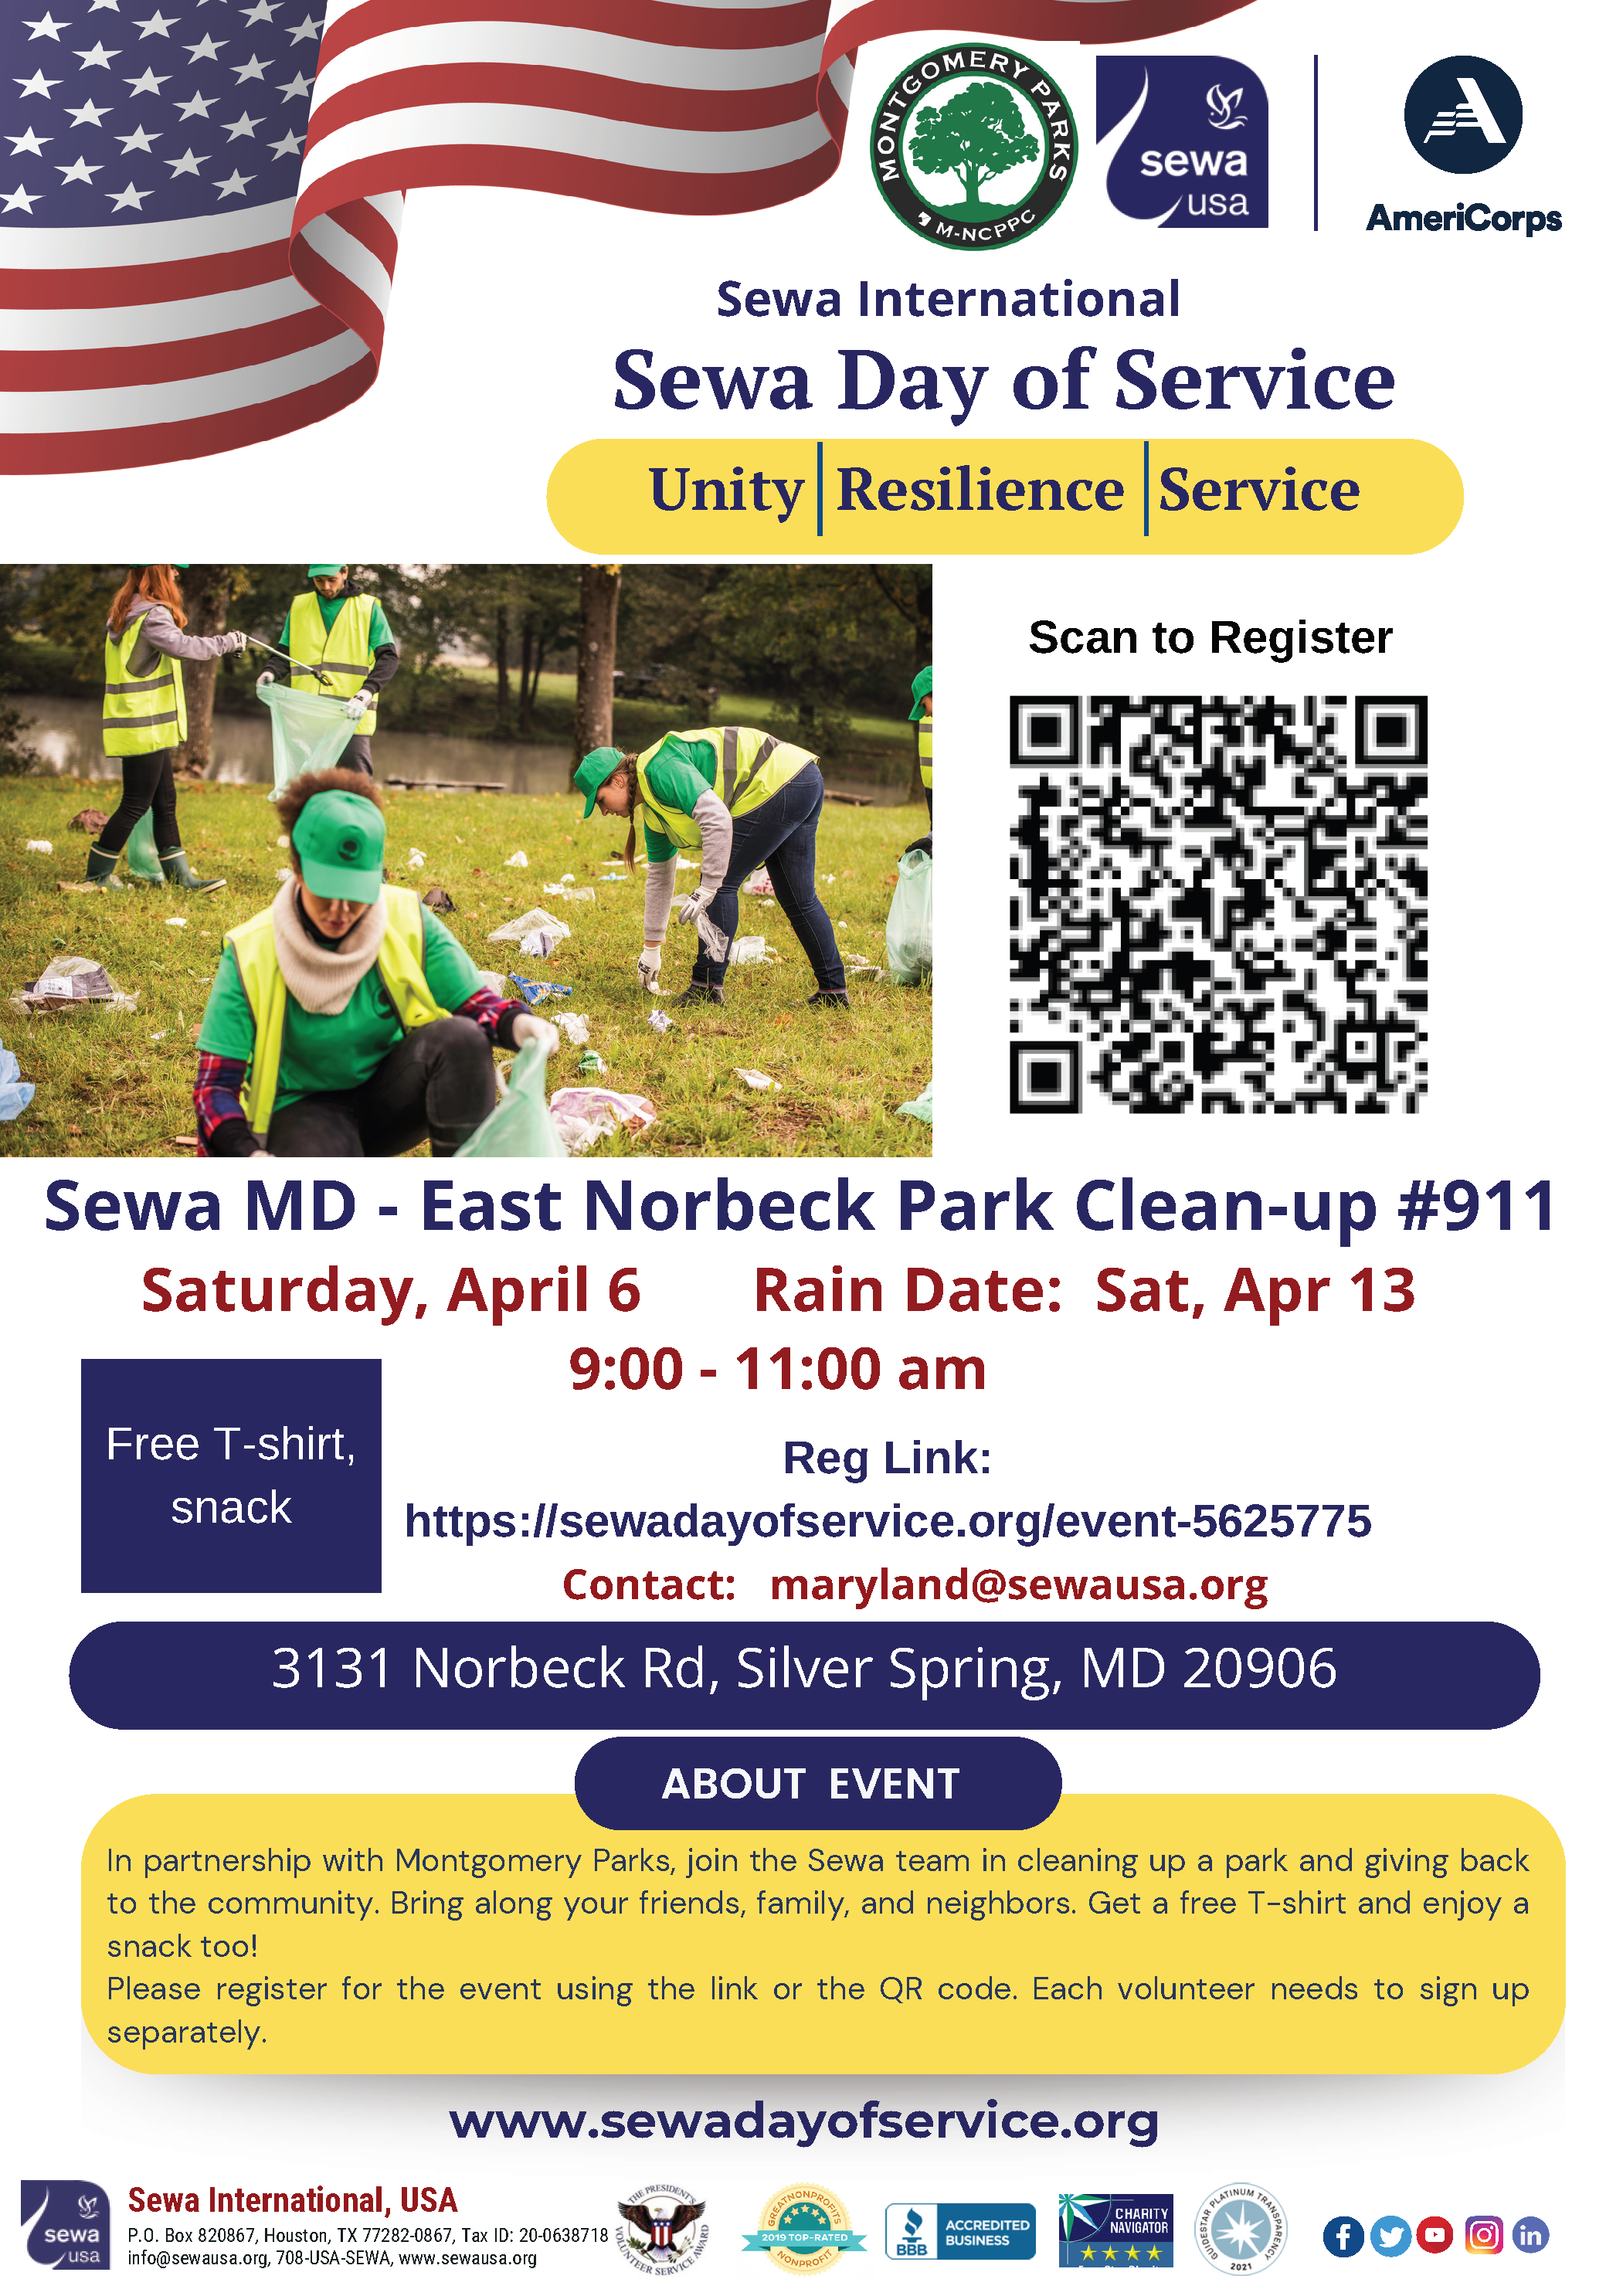 Sewa Day of Service Flyer. Sewa MD - East Norbeck Park Clean-up. Saturday, April 6 Rain Date: Sat, Apr 13 9:00 - 11:00 am. In partnership with Montgomery Parks, join the Sewa team in cleaning up a park and giving back to the community. Bring along your friends, family, and neighbors. Get a free T-shirt and enjoy a snack too! Please register for the event using the link or the QR code. Each volunteer needs to sign up separately. www.sewadayofservice.org